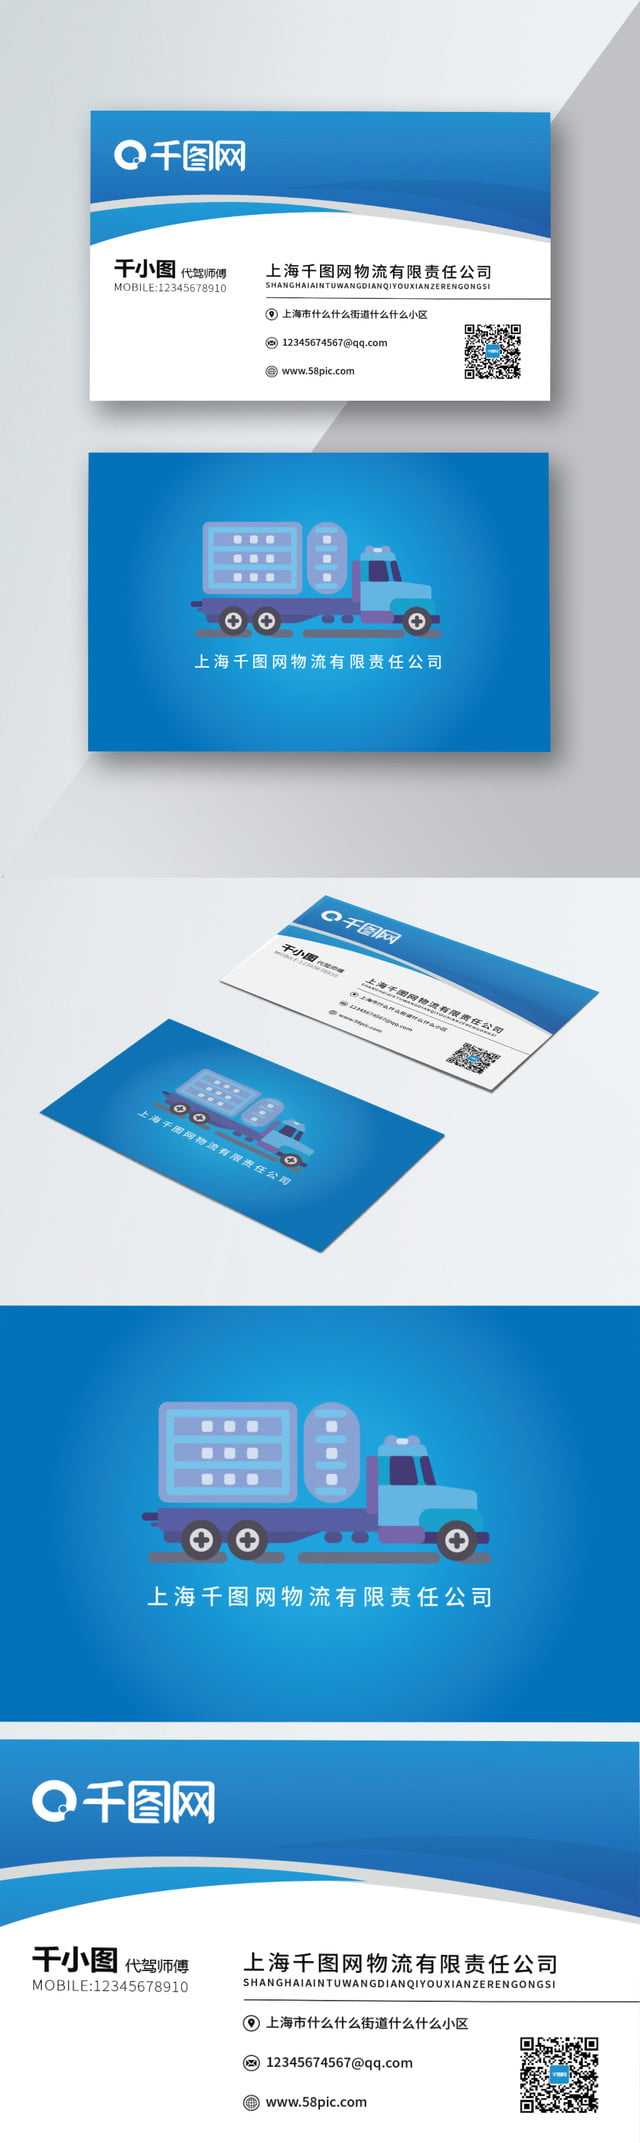 Logistics Company Business Card Vector Material Logistics With Transport Business Cards Templates Free